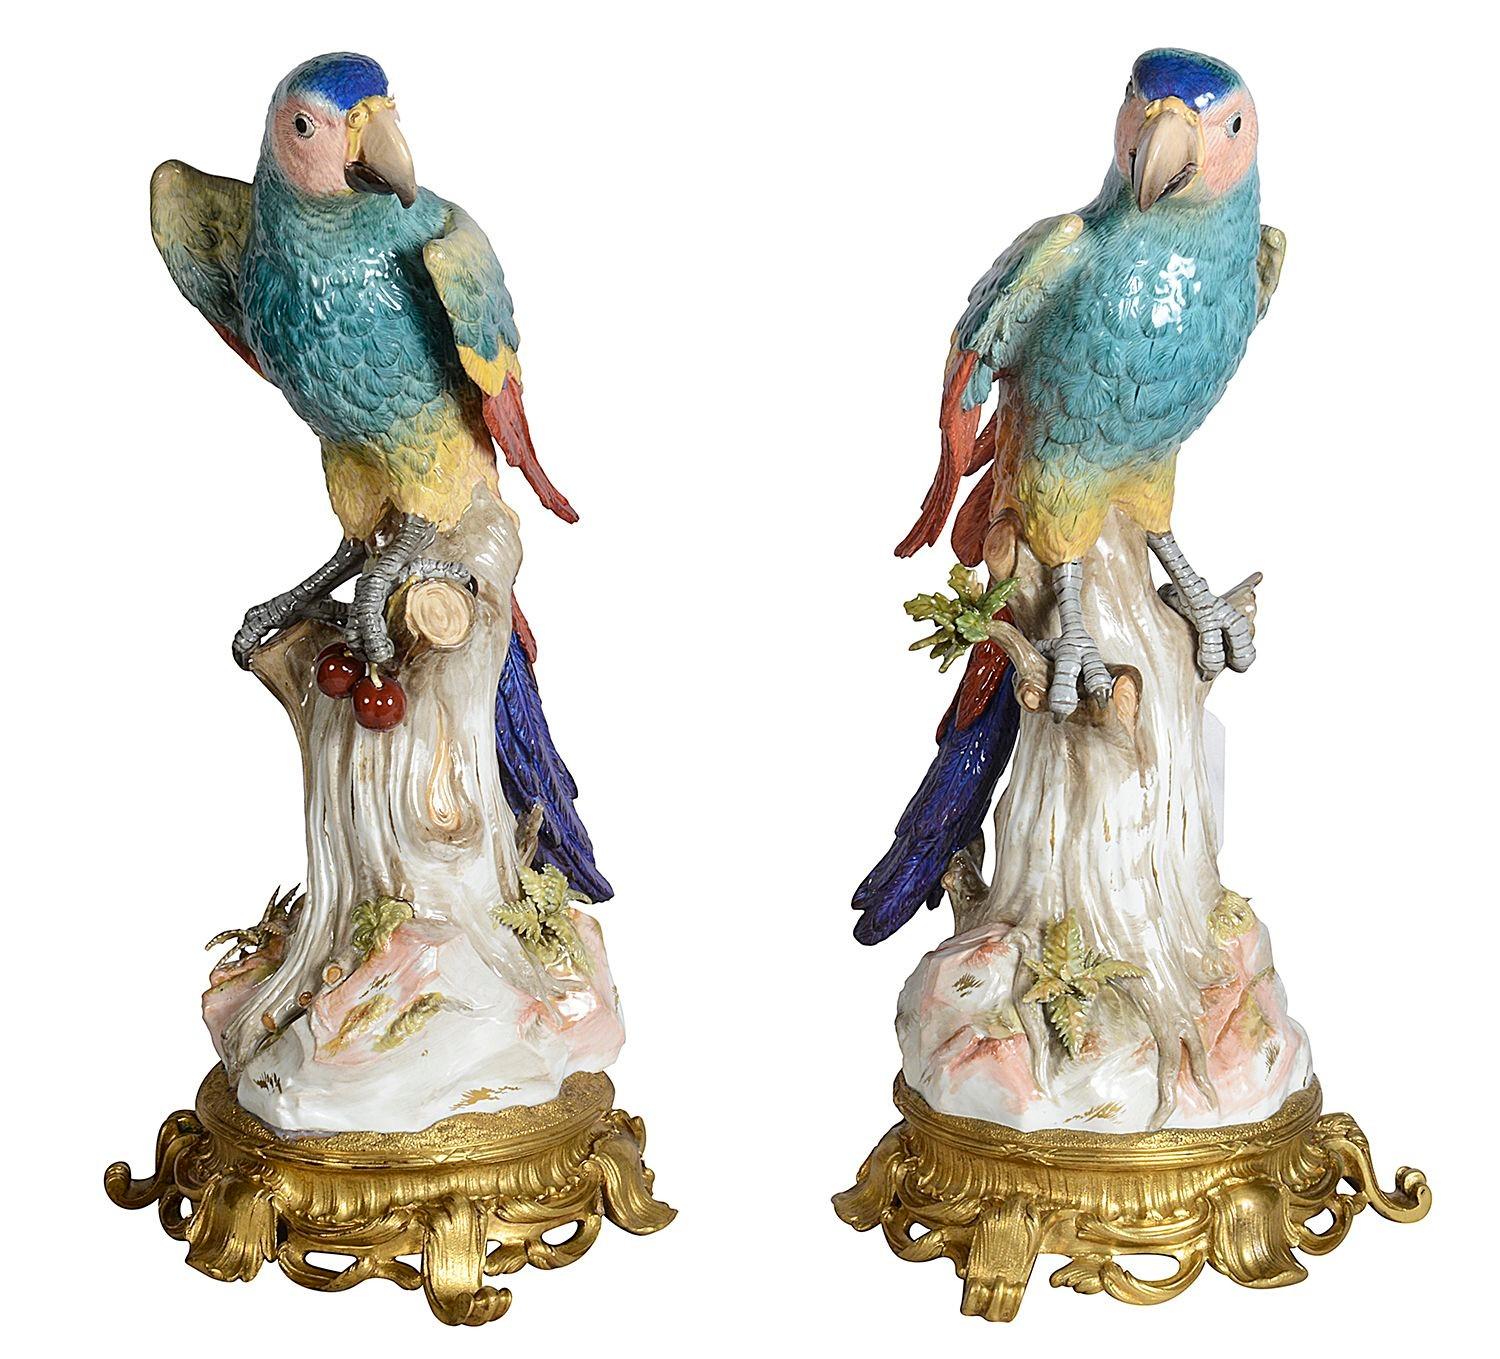 An rare and important pair of 19th Century Meissen porcelain Parrots, each with wonderful bold colouring and detail, perched on tree stumps, one with cherries in its claw, mounted on scrolling foliate Rococo style gilded ormolu bases.
Each with Blue